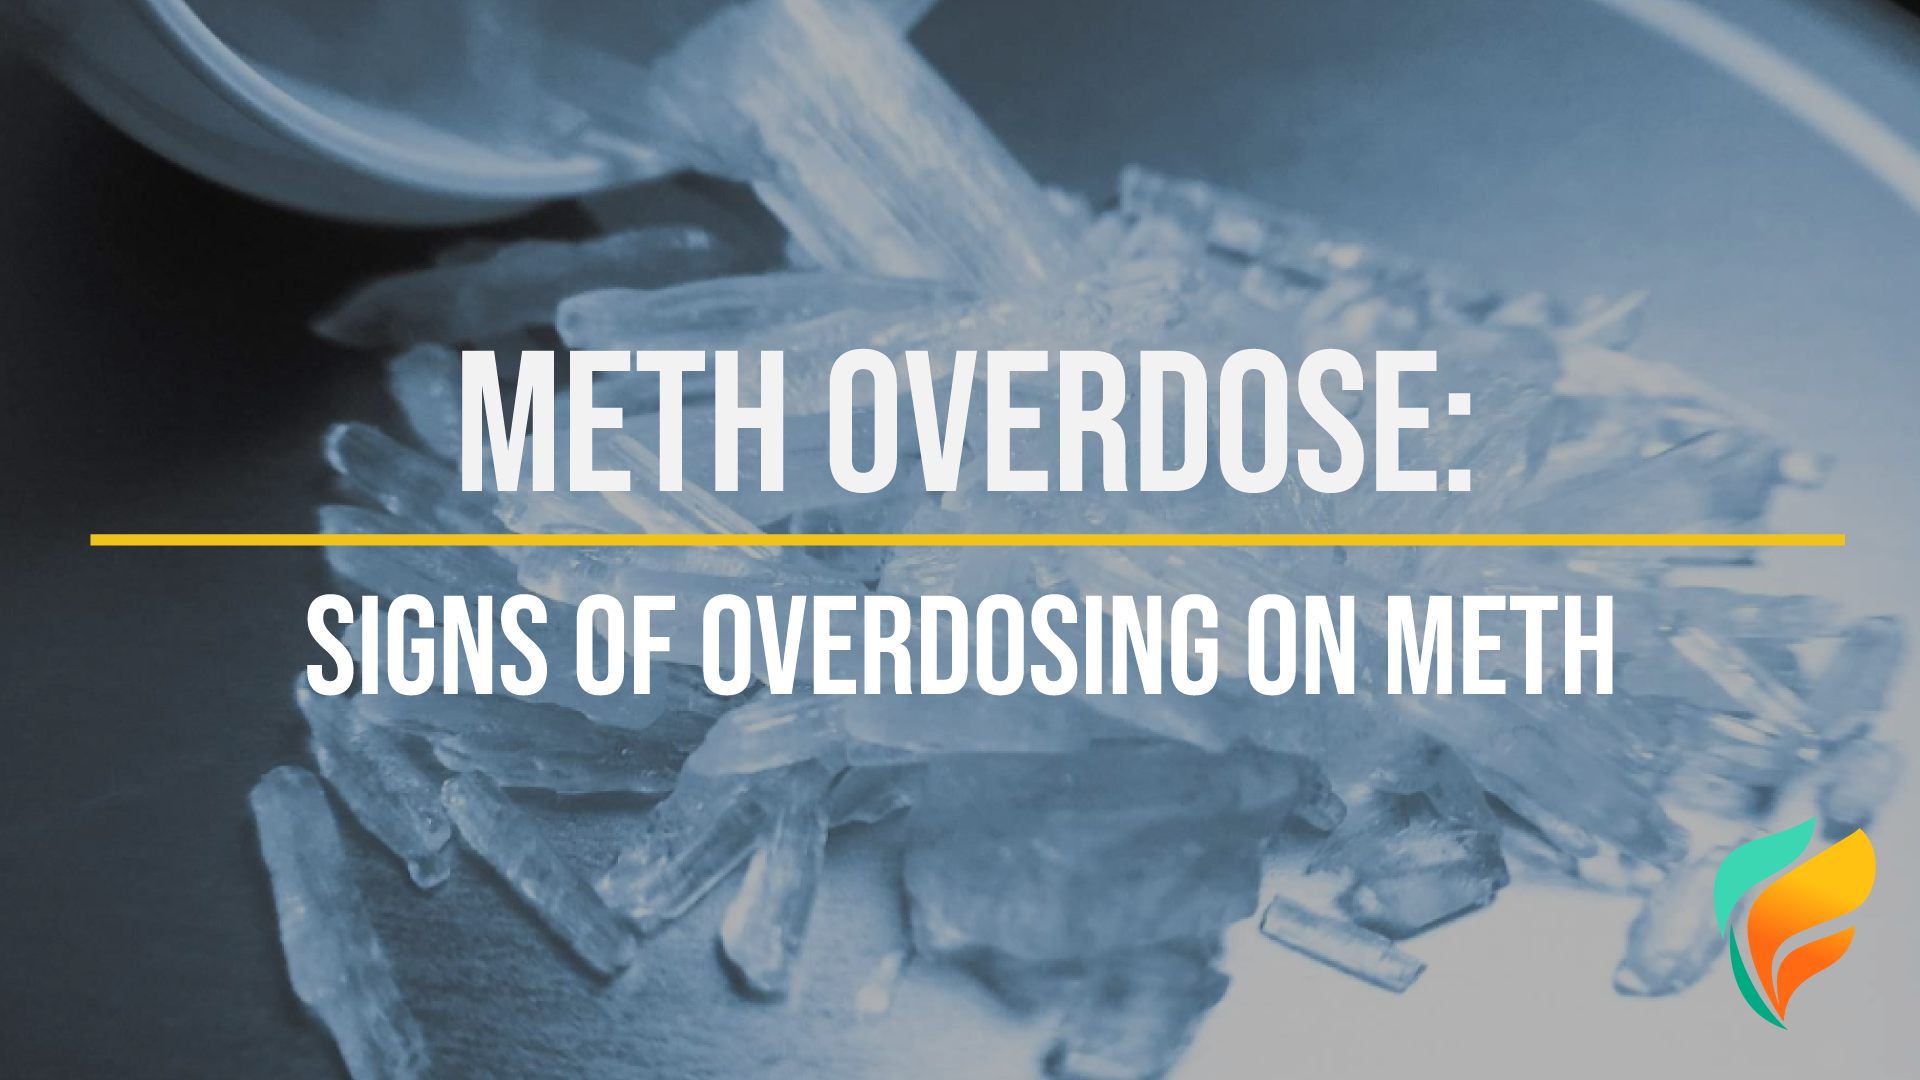 Meth overdose: What are the signs?